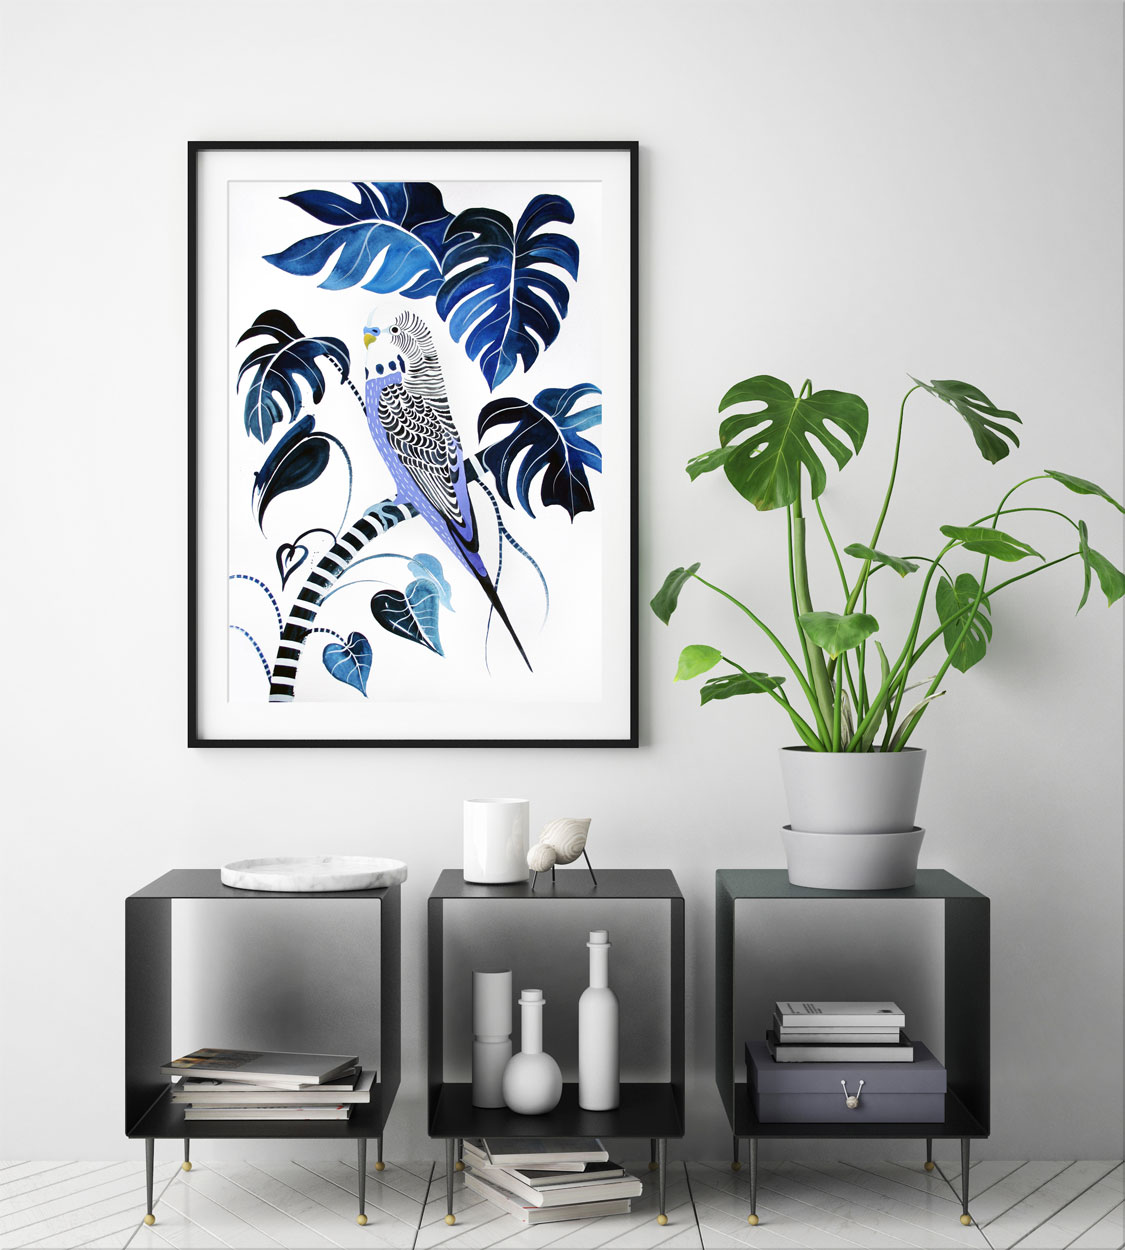 Painting of a budgie framed and hung above a modern cabinet